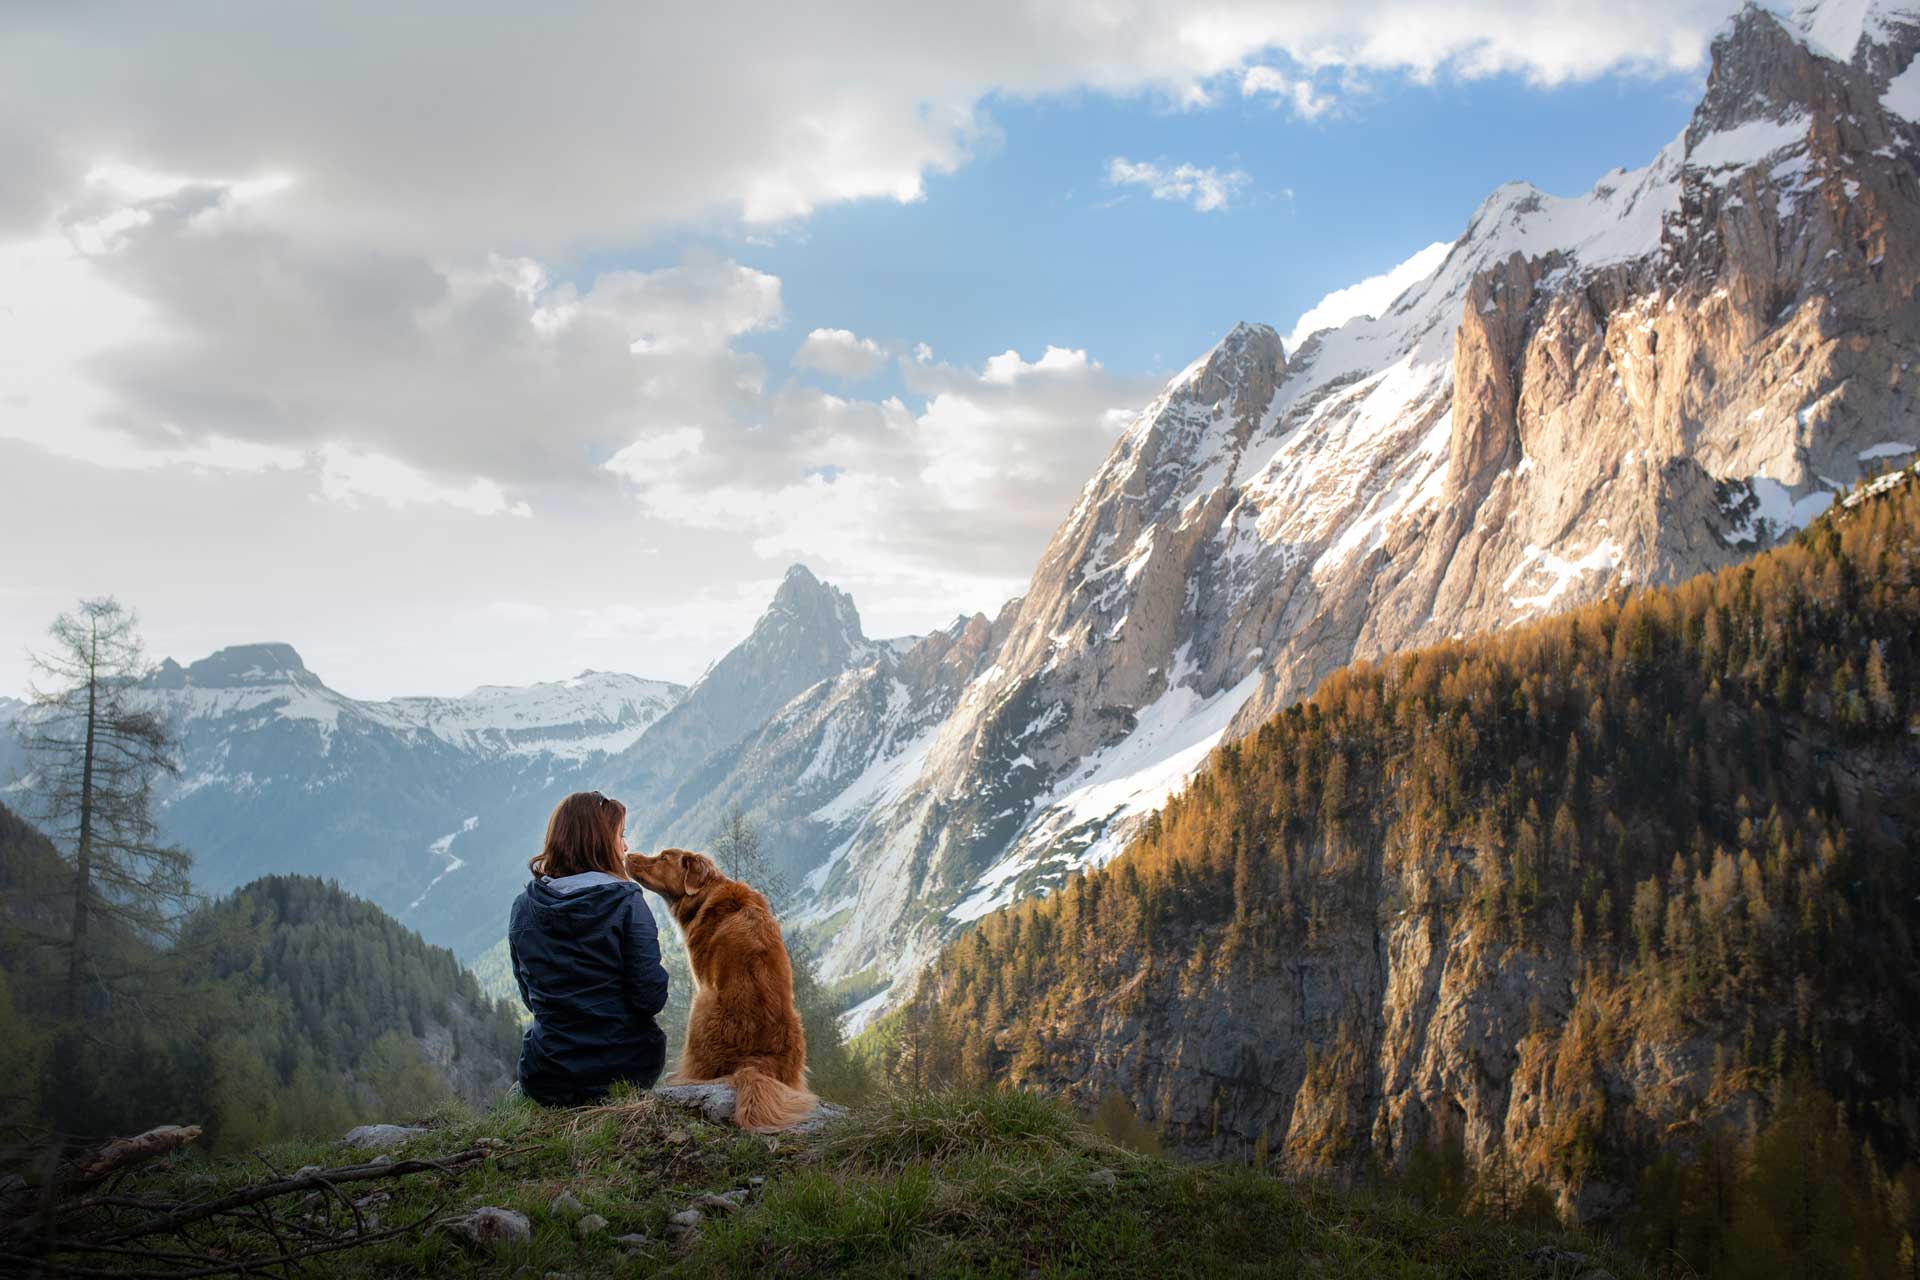 Dog licking woman's face in mountain setting